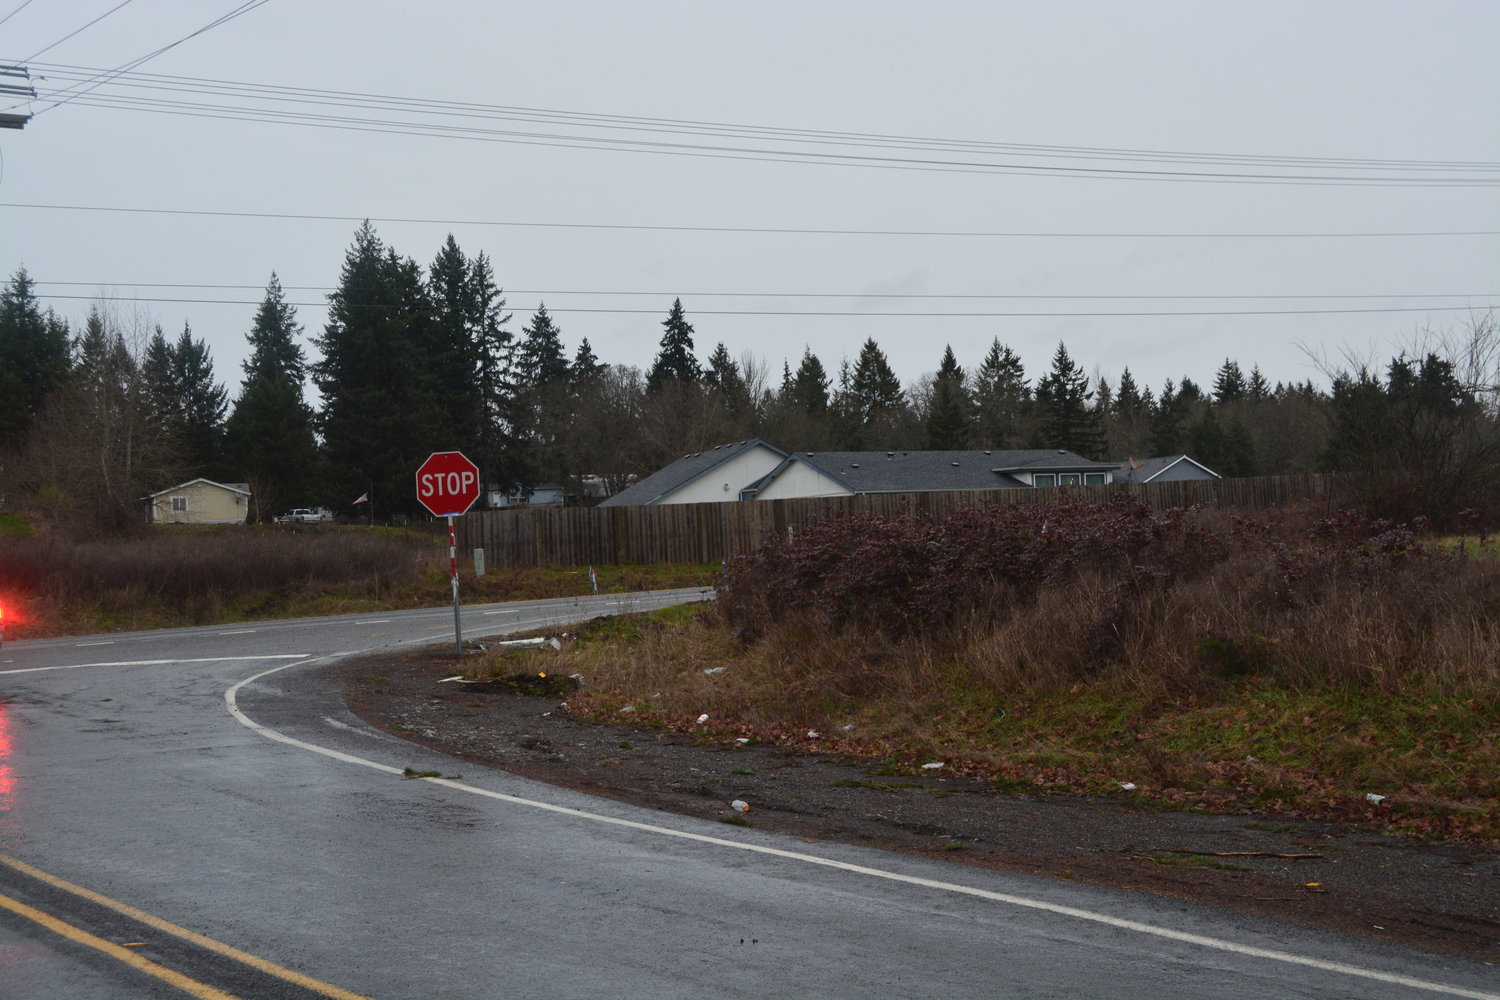 The Washington State Department of Transportation is holding an open house focused in part on a potential roundabout on state Route 702.